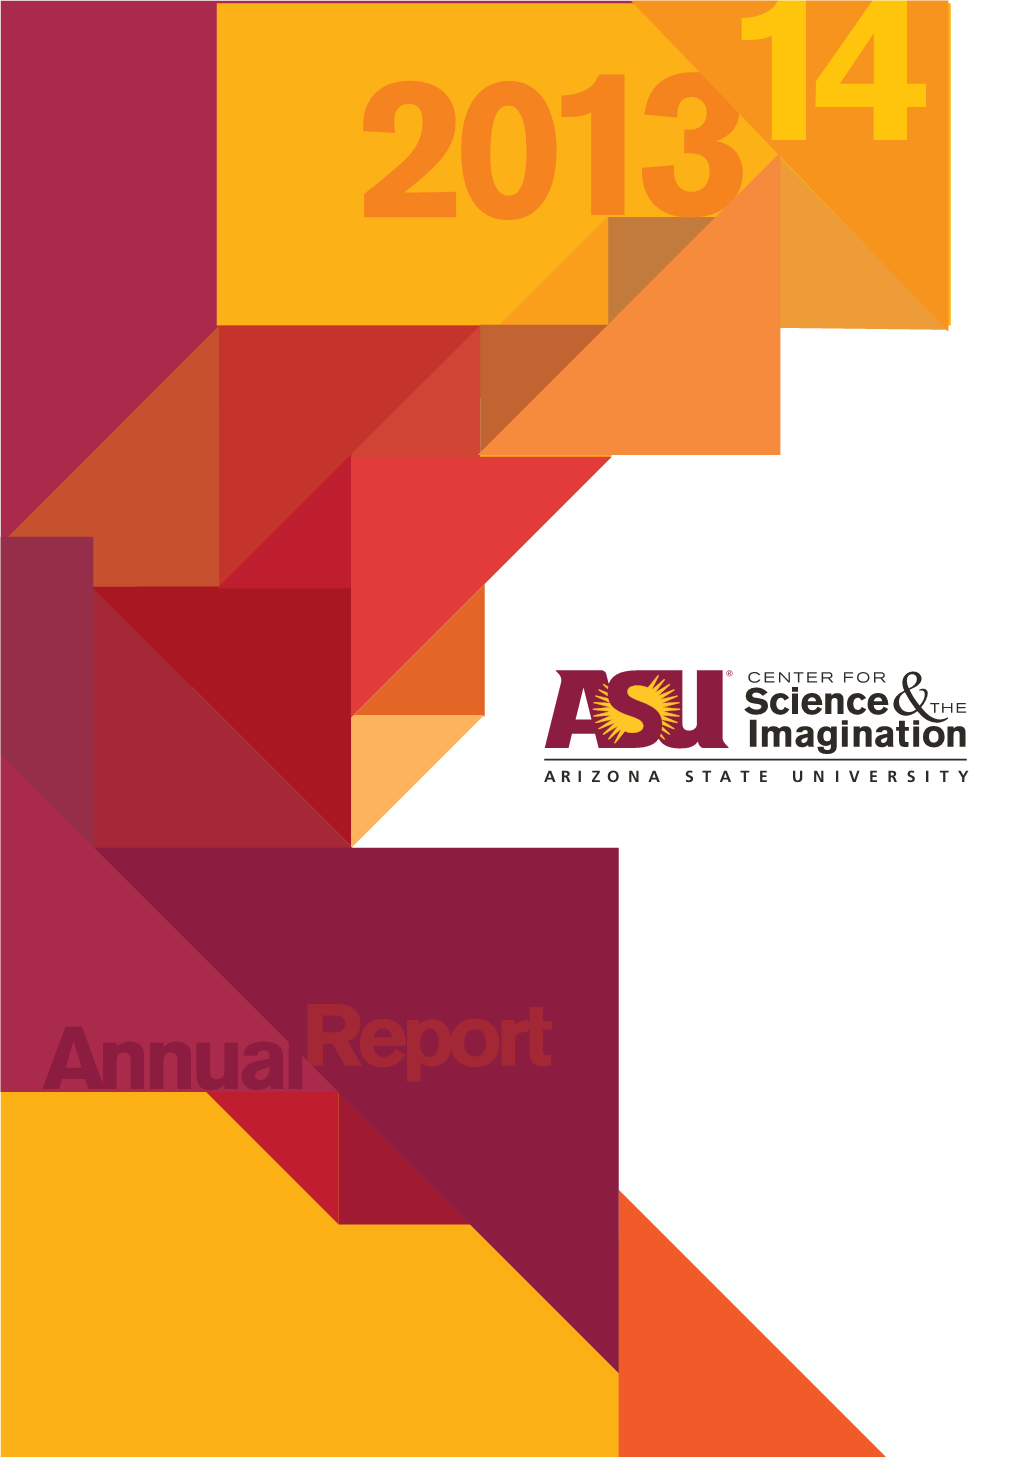 Download the Annual Report 2013-14